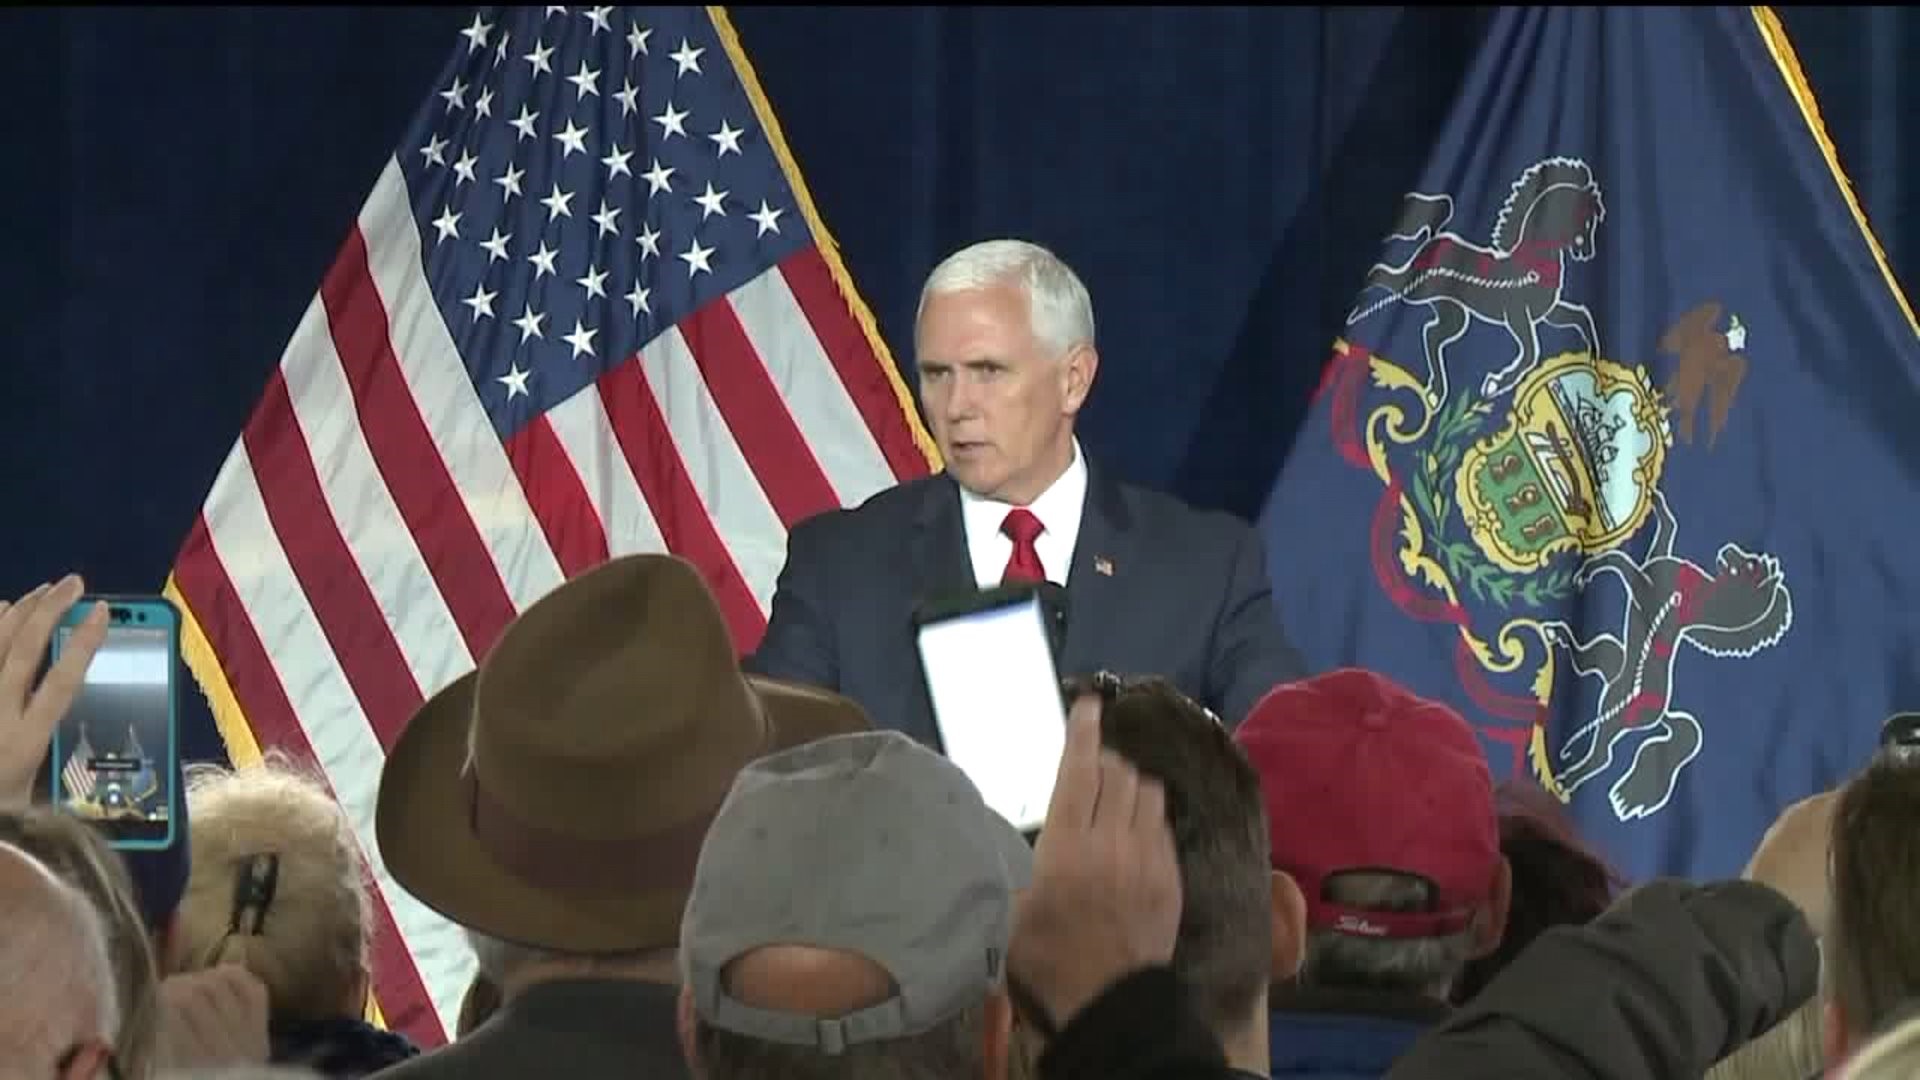 Vice President Pence Visits Chrin Campaign Rally in Luzerne County